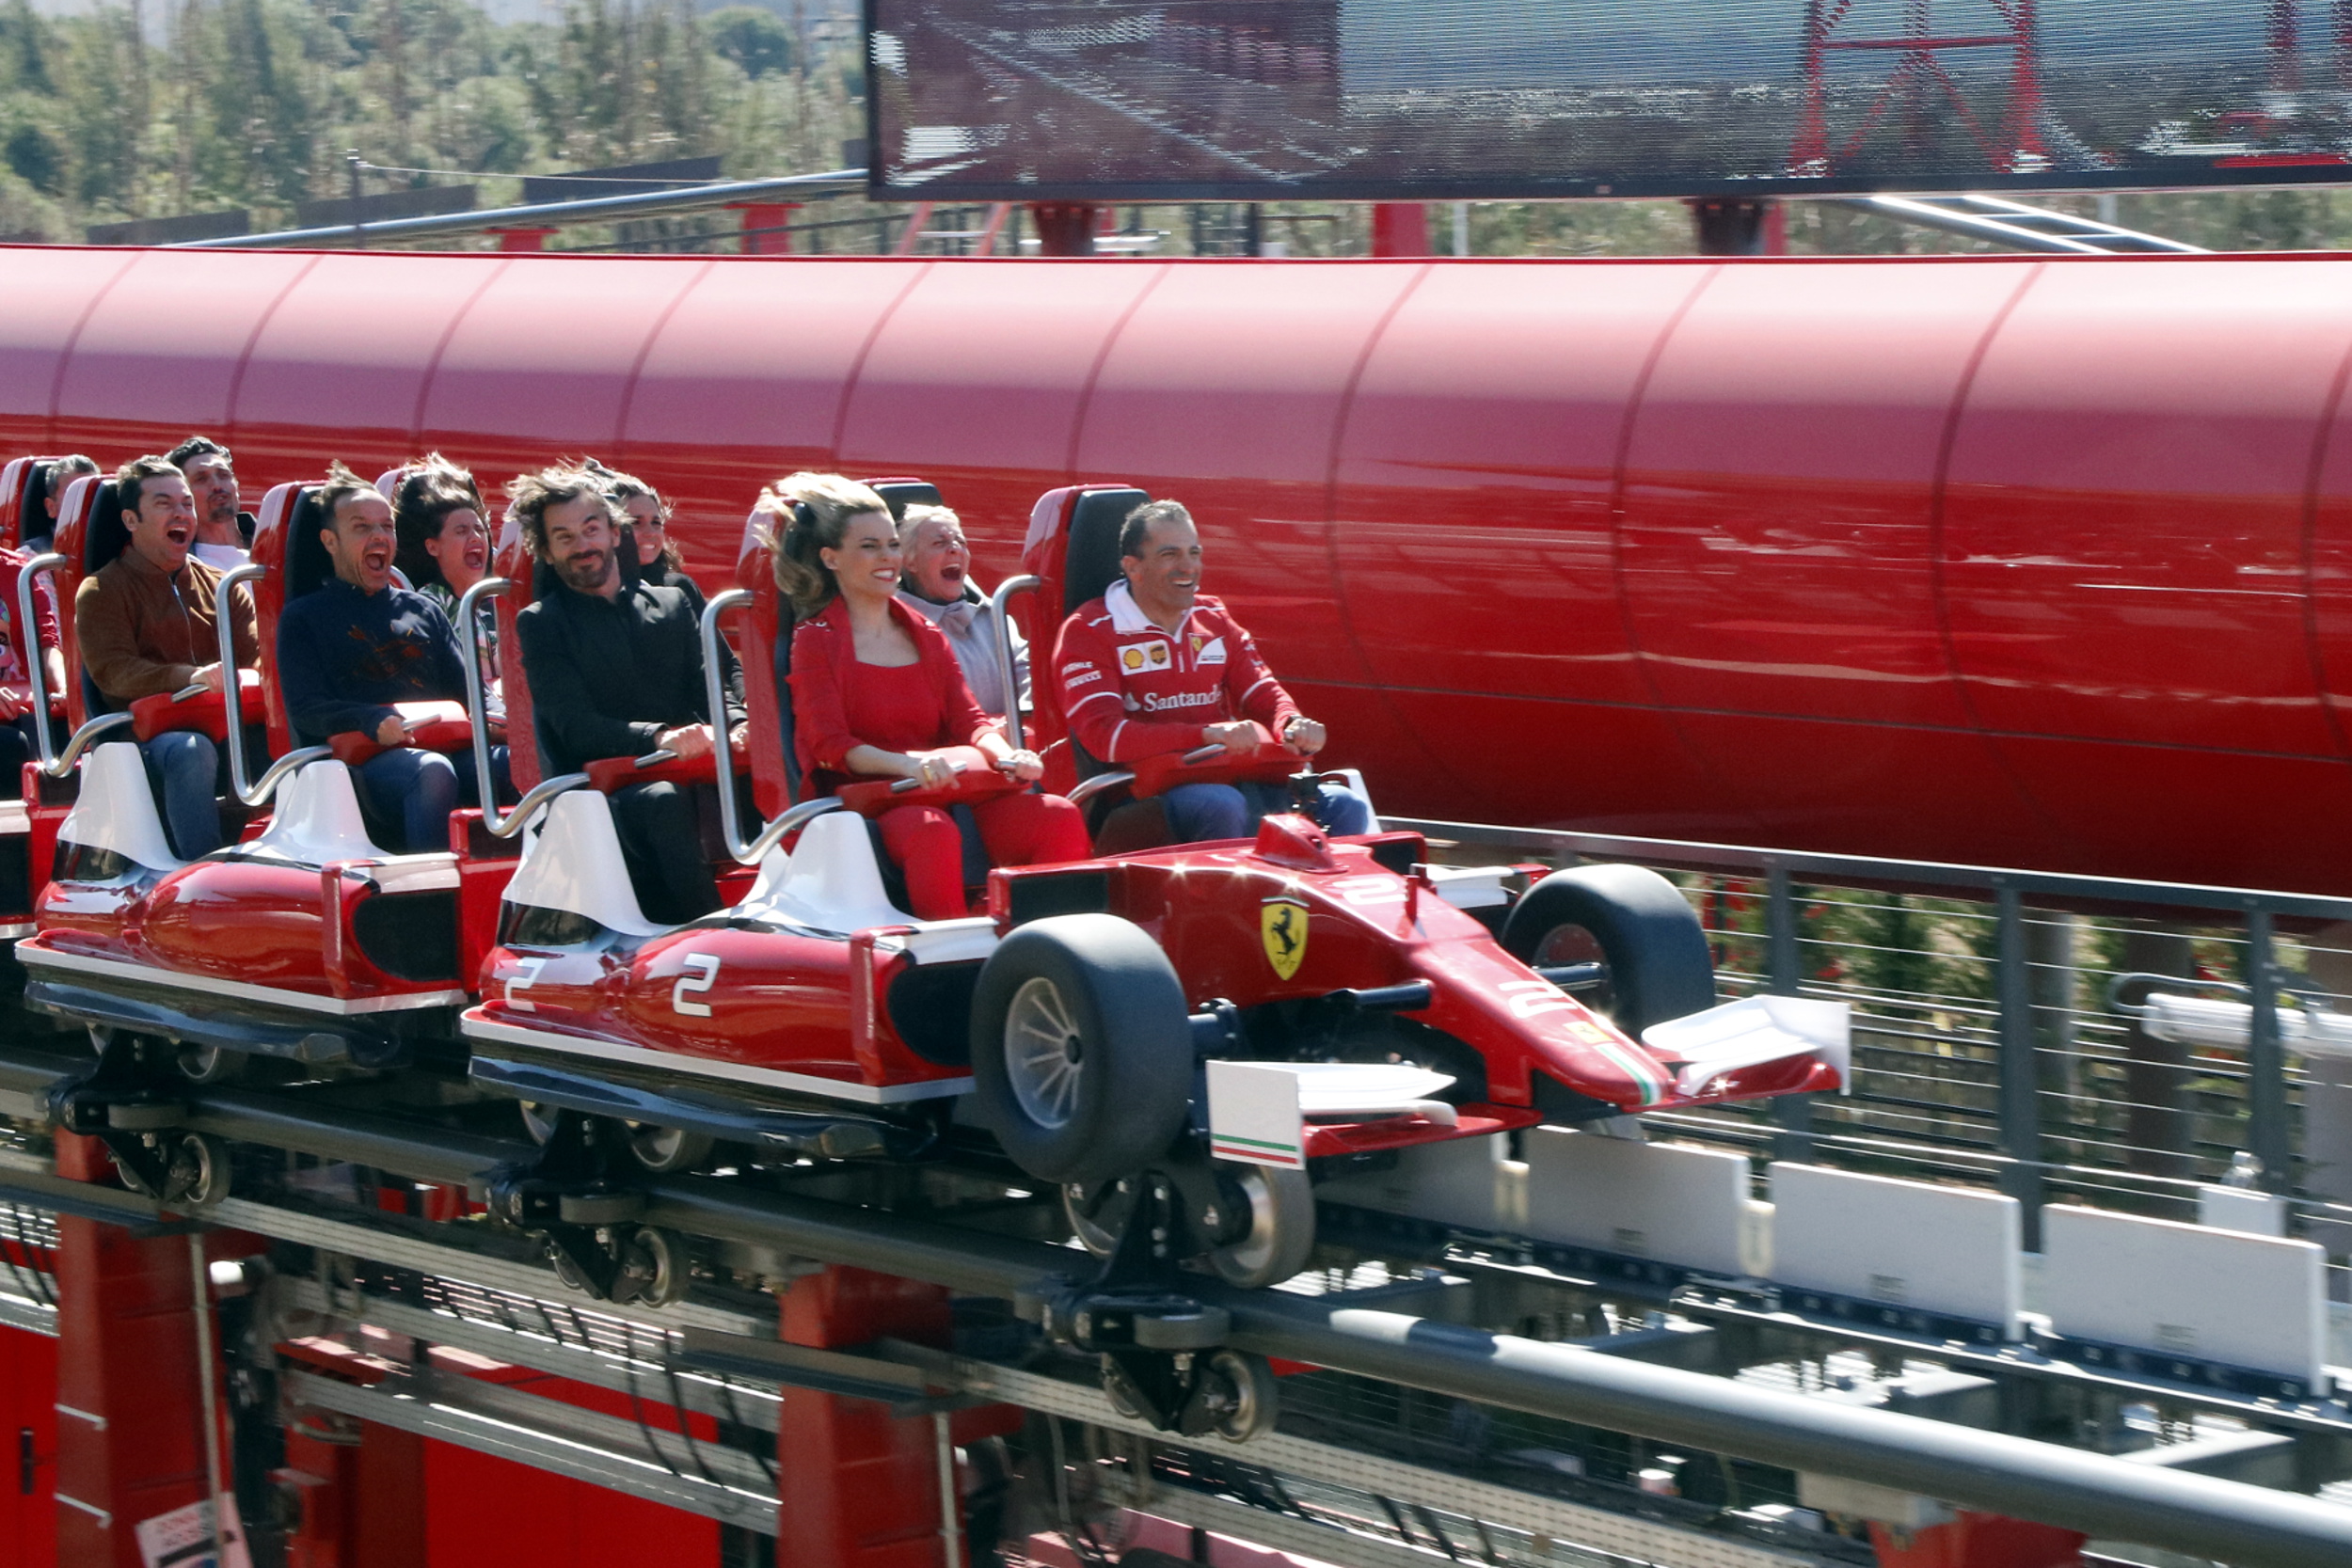 Passengers enjoying's first ride of the 'Red Force', at Ferrari Land (by ACN)